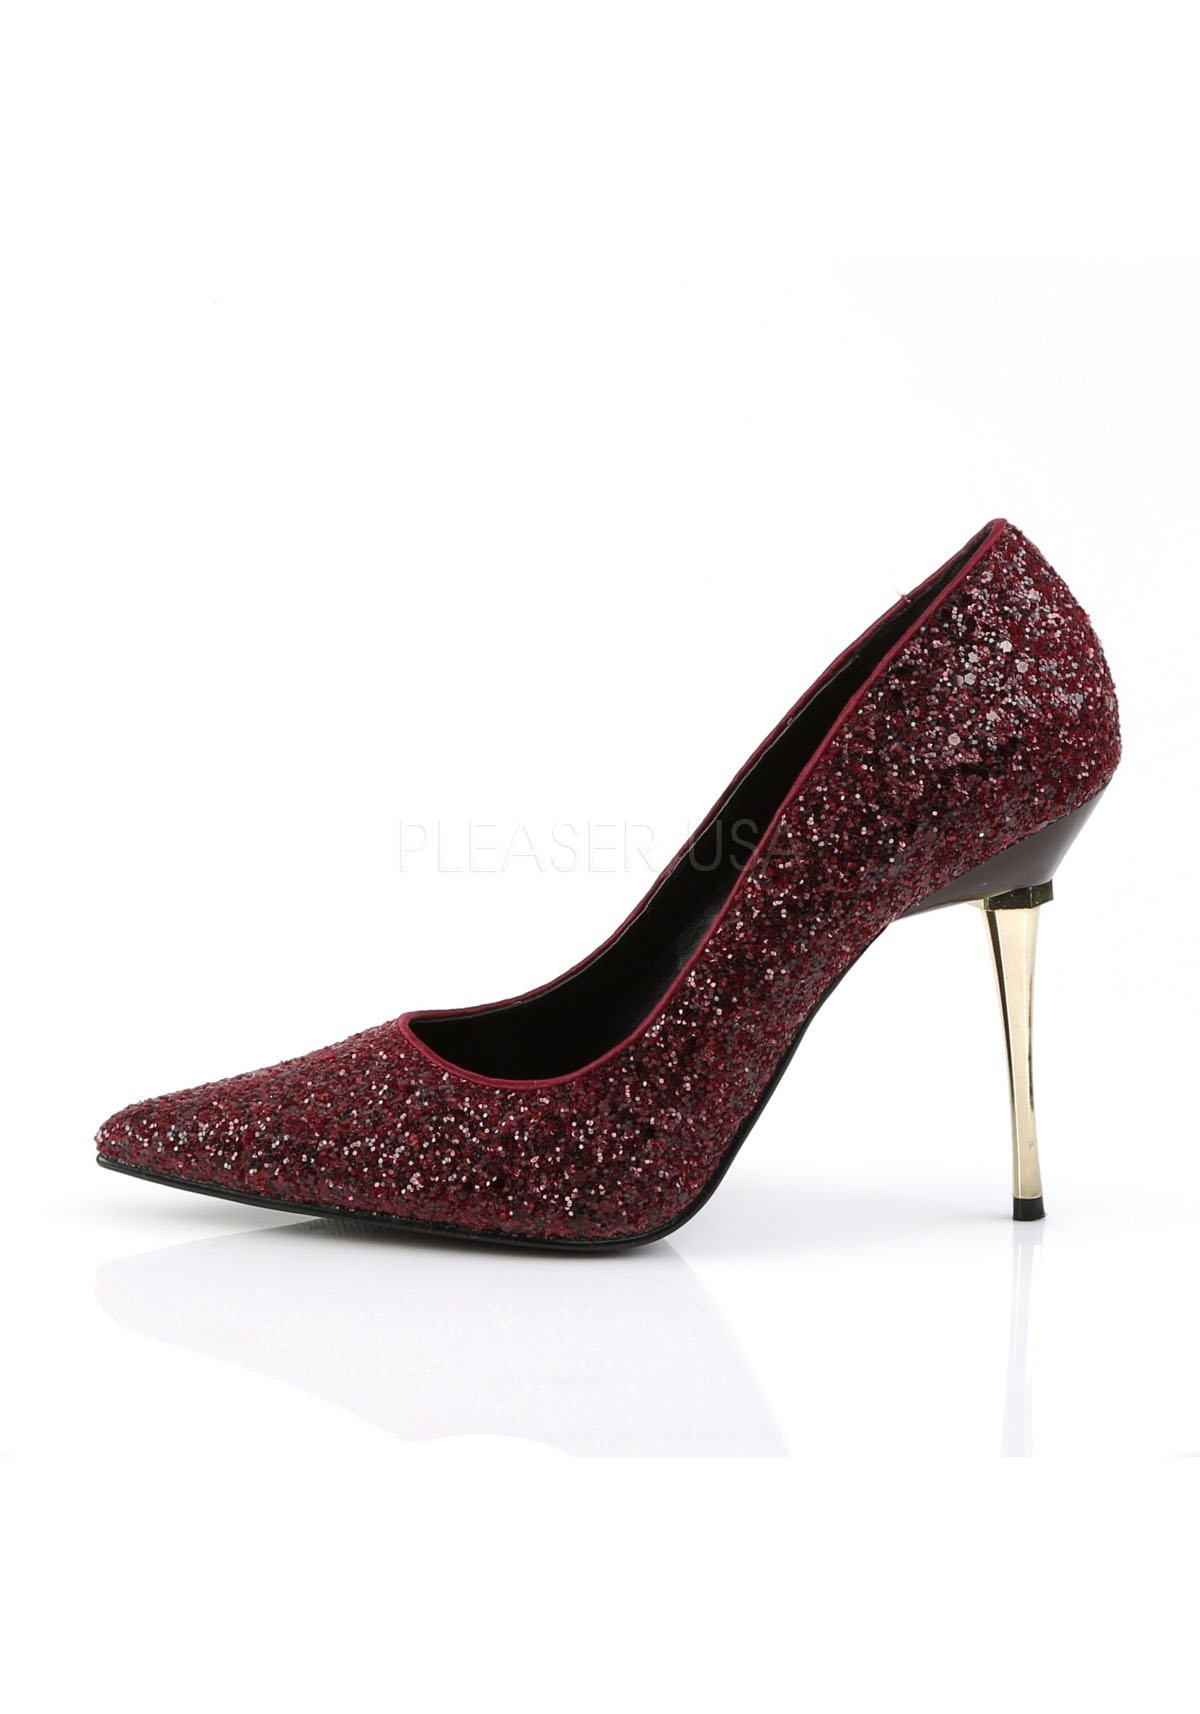 PLEASER APPEAL 20G GLITTER 4" METAL STILETTO HIGH HEEL POINTED TOE COURT SHOES 